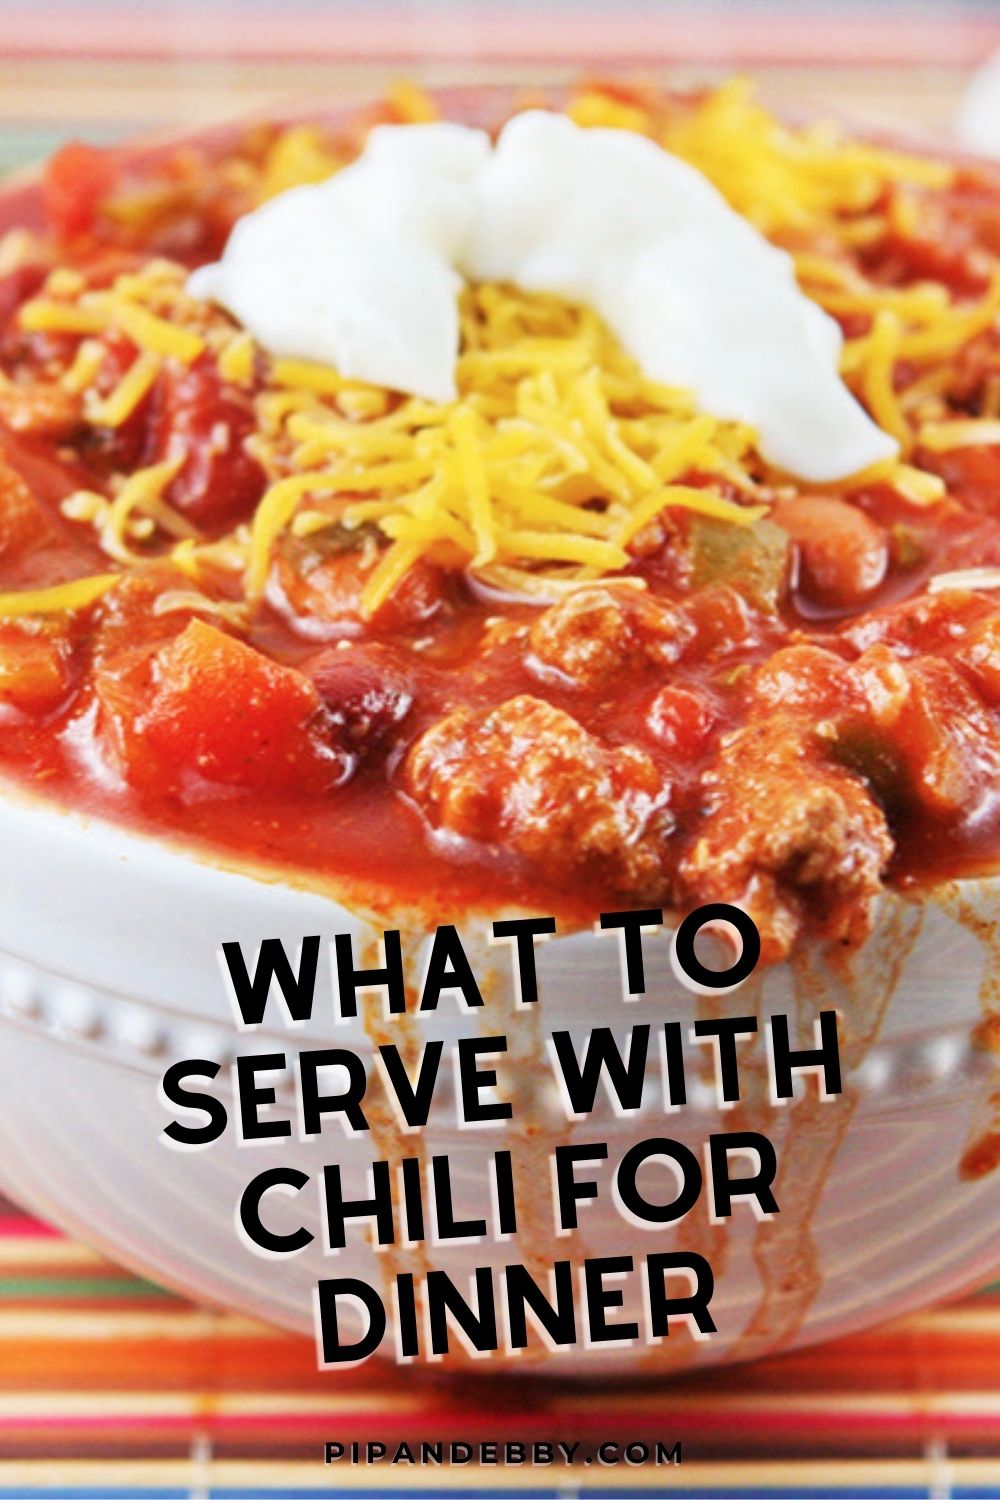 Pinterest image for what to serve with chili for dinner, a big bowl of chili with a dollop of sour cream on top